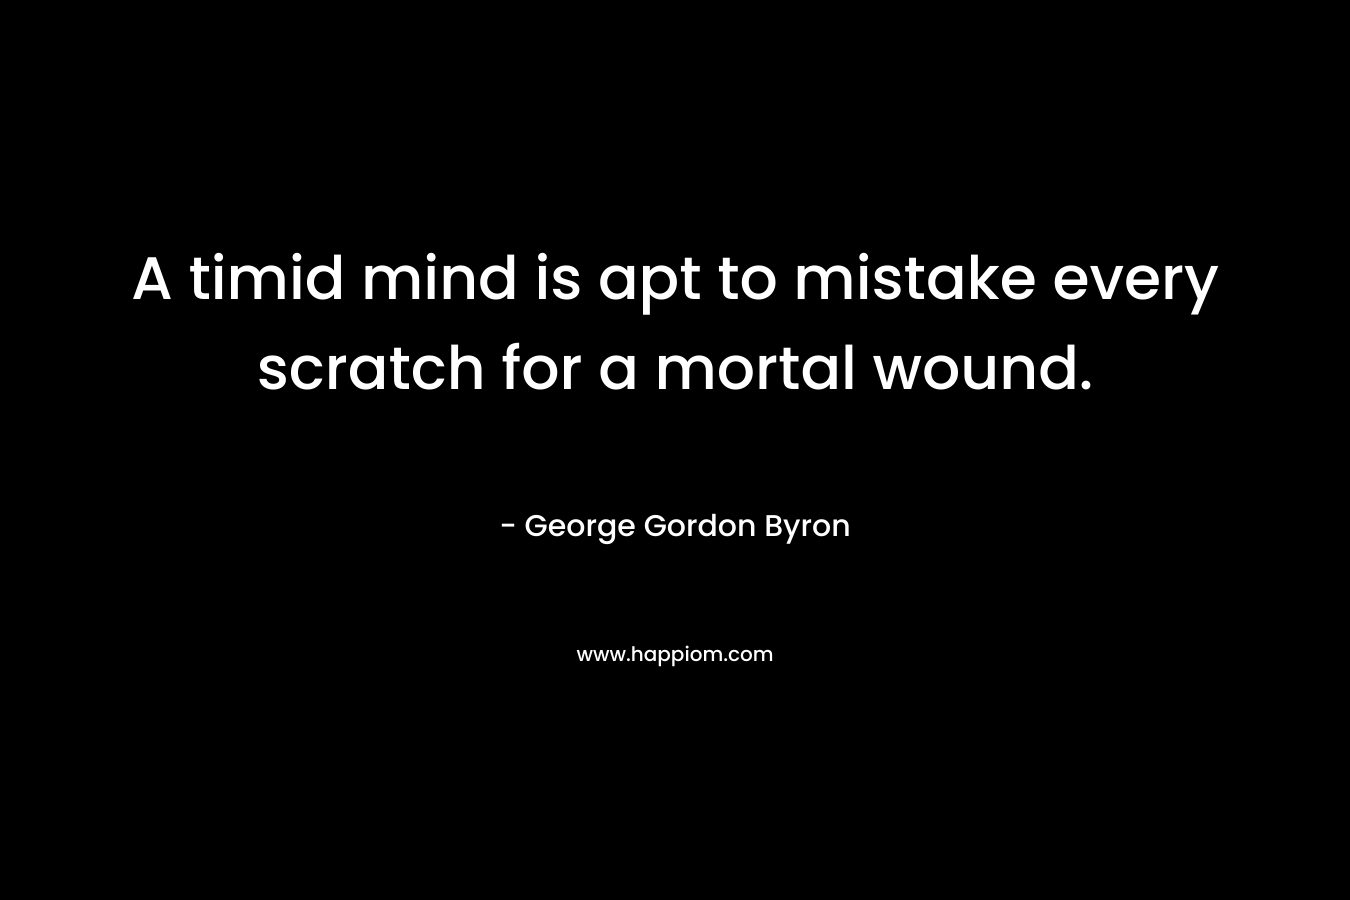 A timid mind is apt to mistake every scratch for a mortal wound.